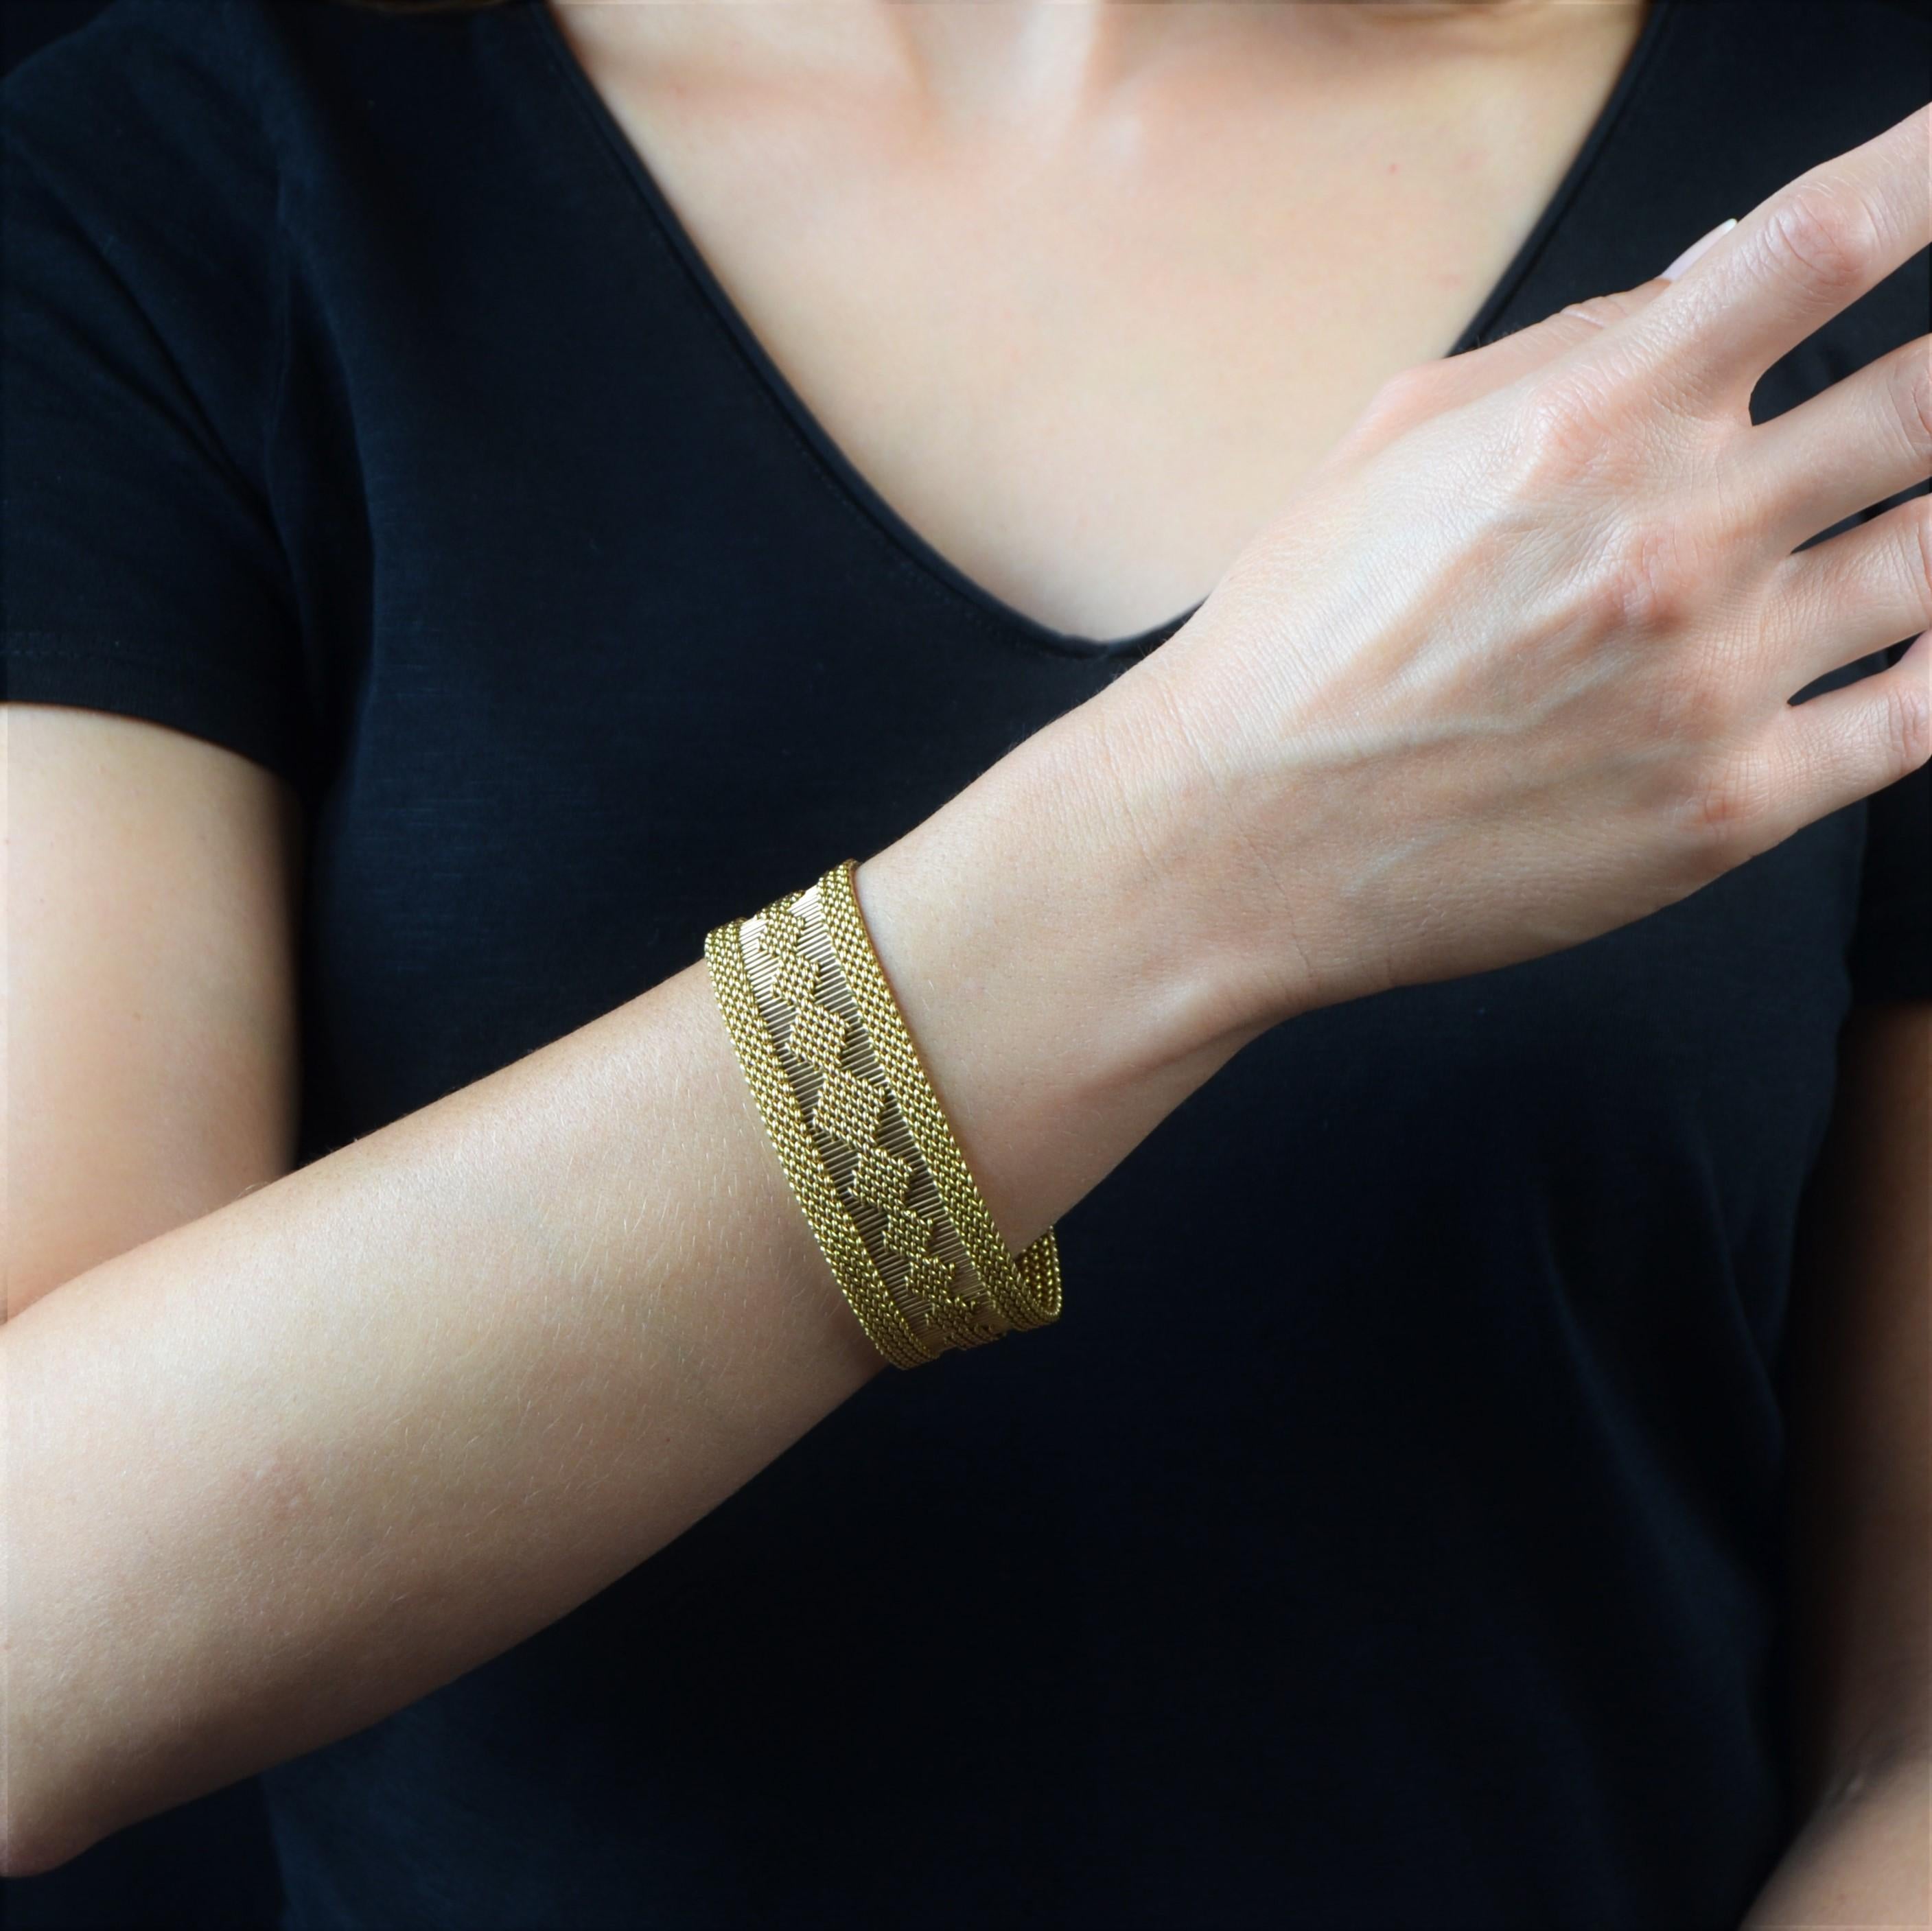 Bracelet in 18 karat yellow gold. 
This antique golden bracelet is composed of a flexible woven golden mesh with a central openwork feature. The clasp is in the form of a clip with 2 safety 8 fixtures. 
Total length : 19.4 cm, width: 2.35 cm, the